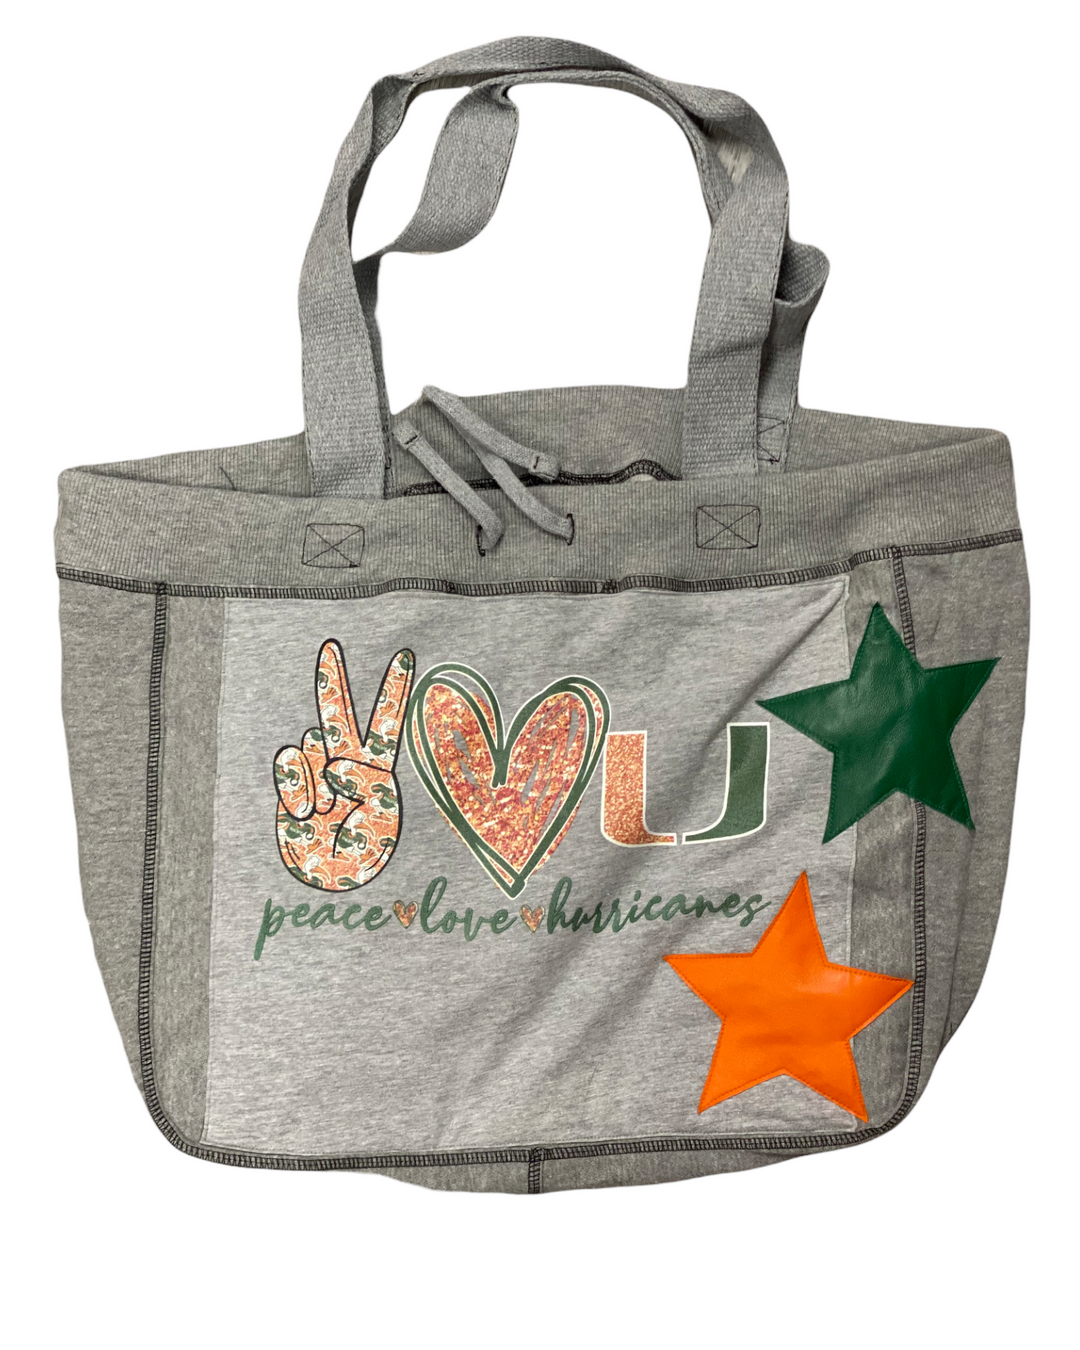 Patched Up Miami Tote